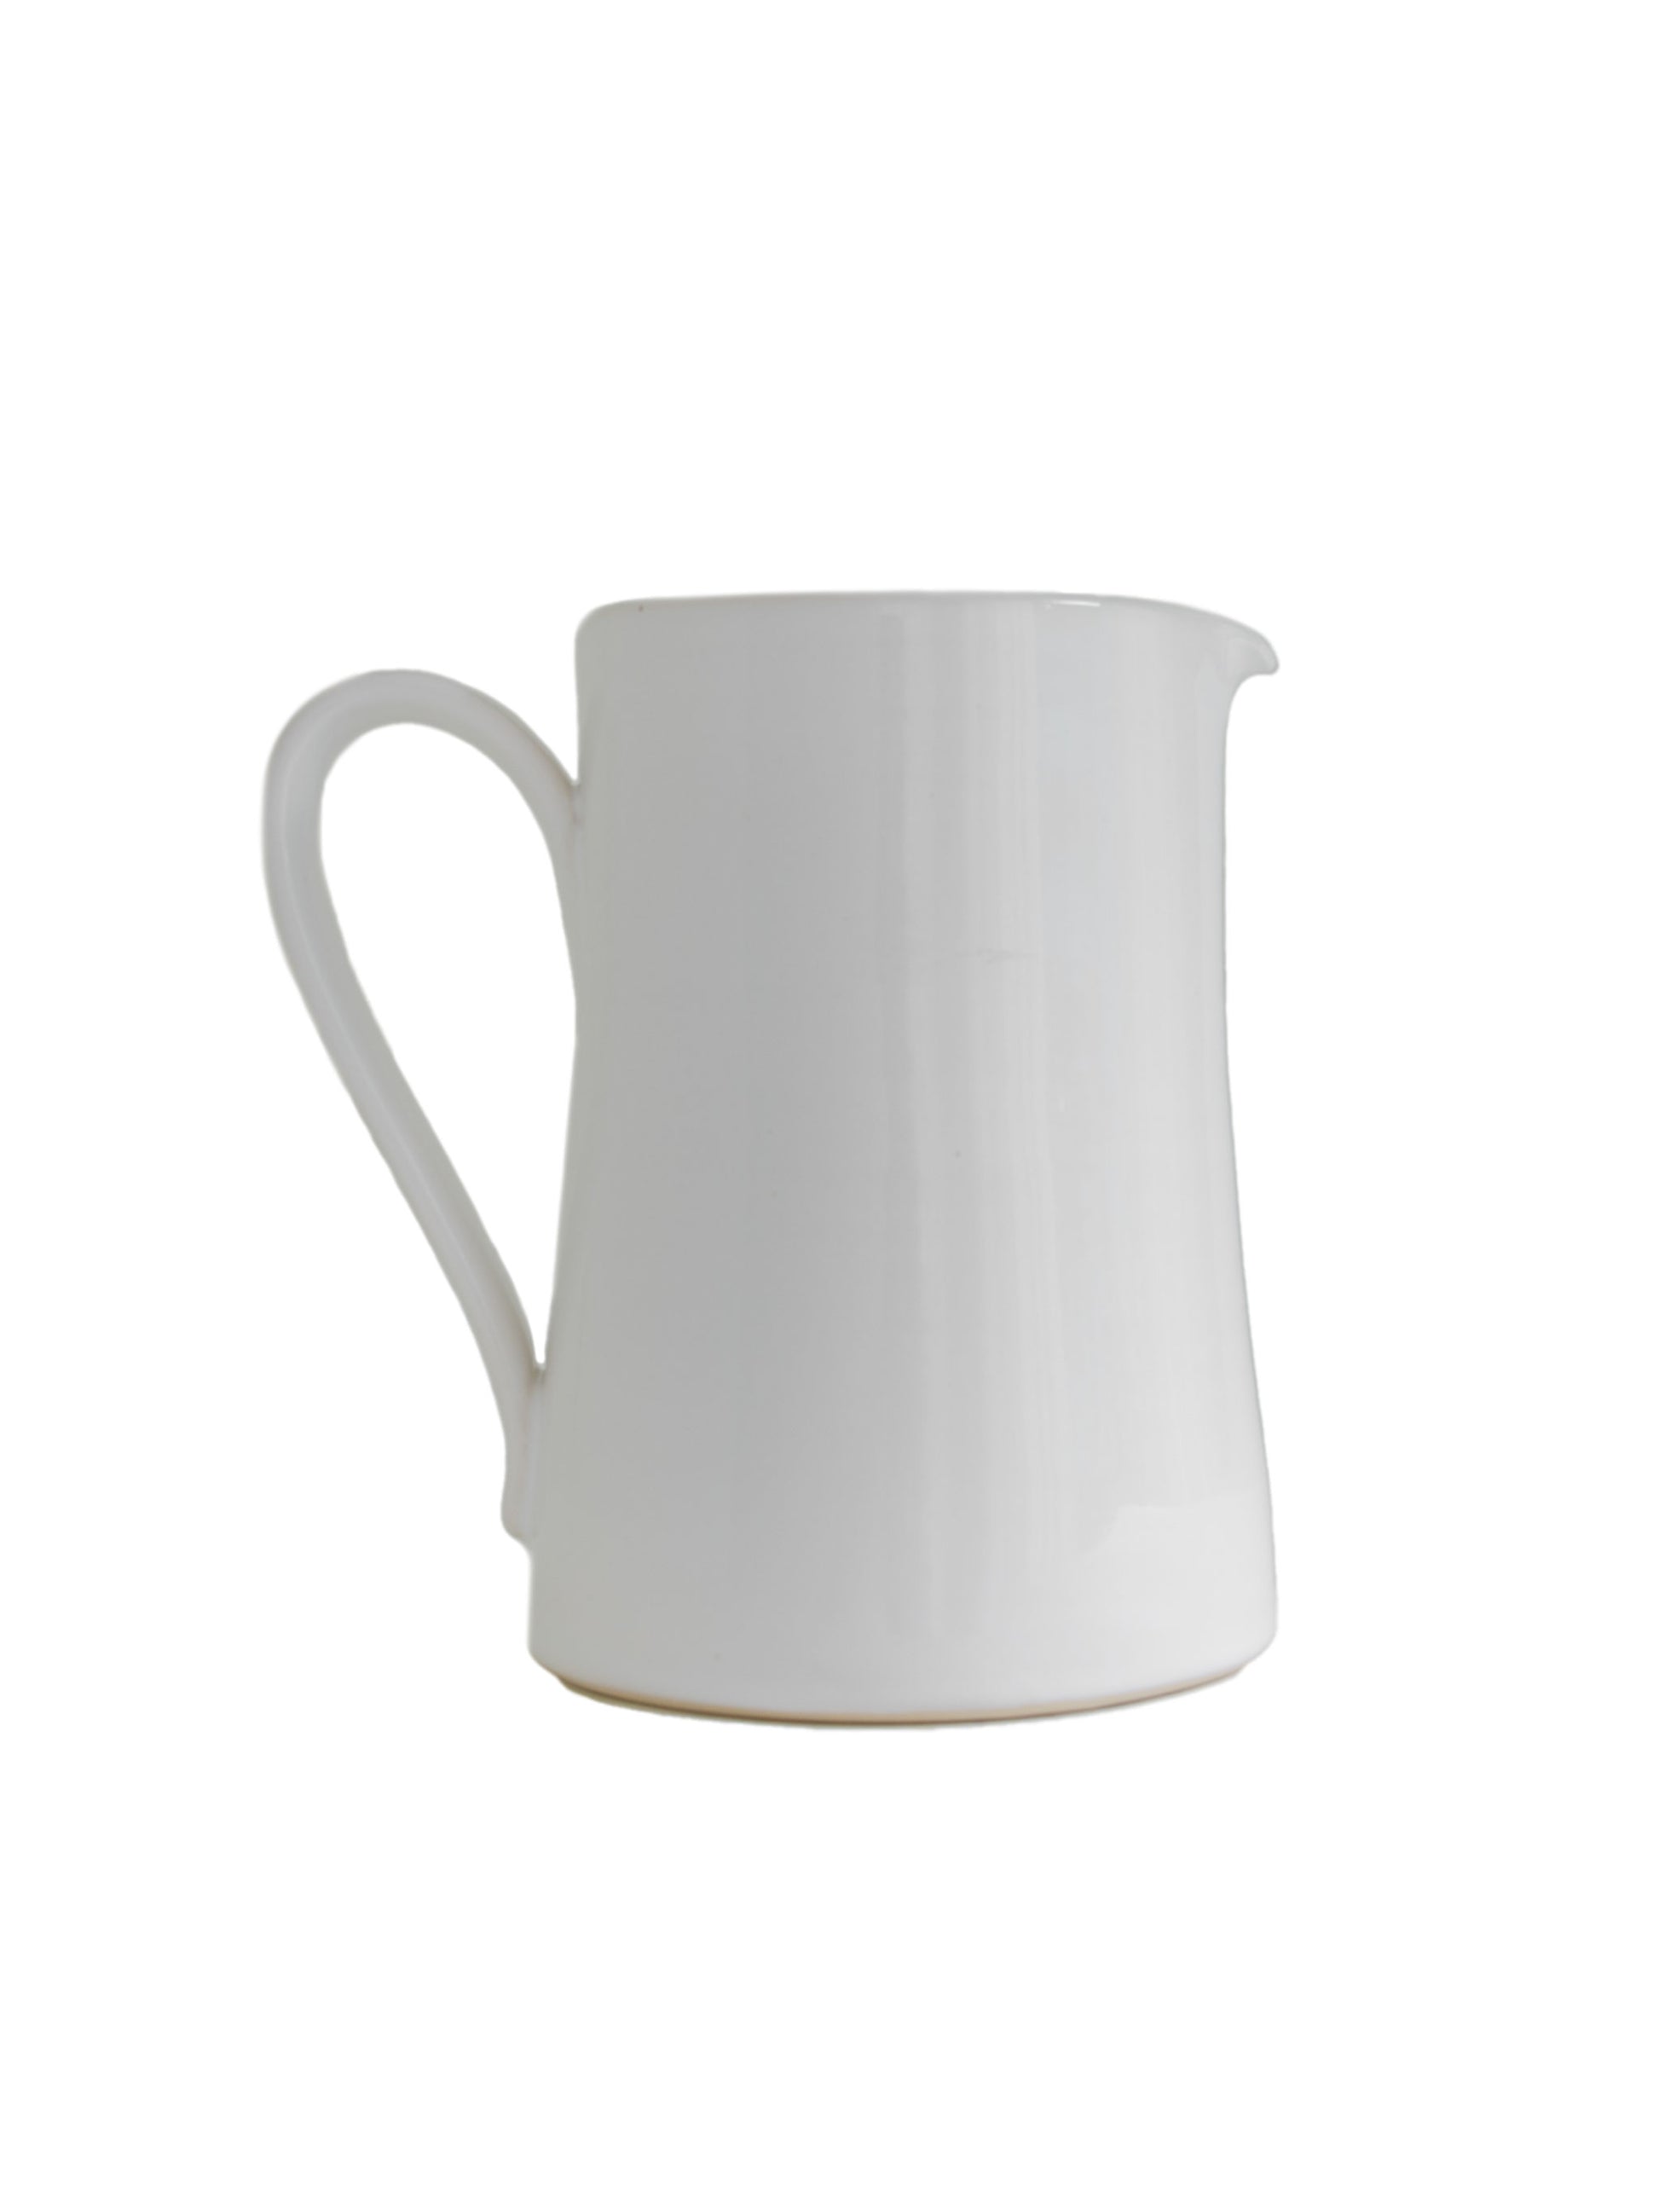 McQueen Pottery Pitcher White Large Weston Table